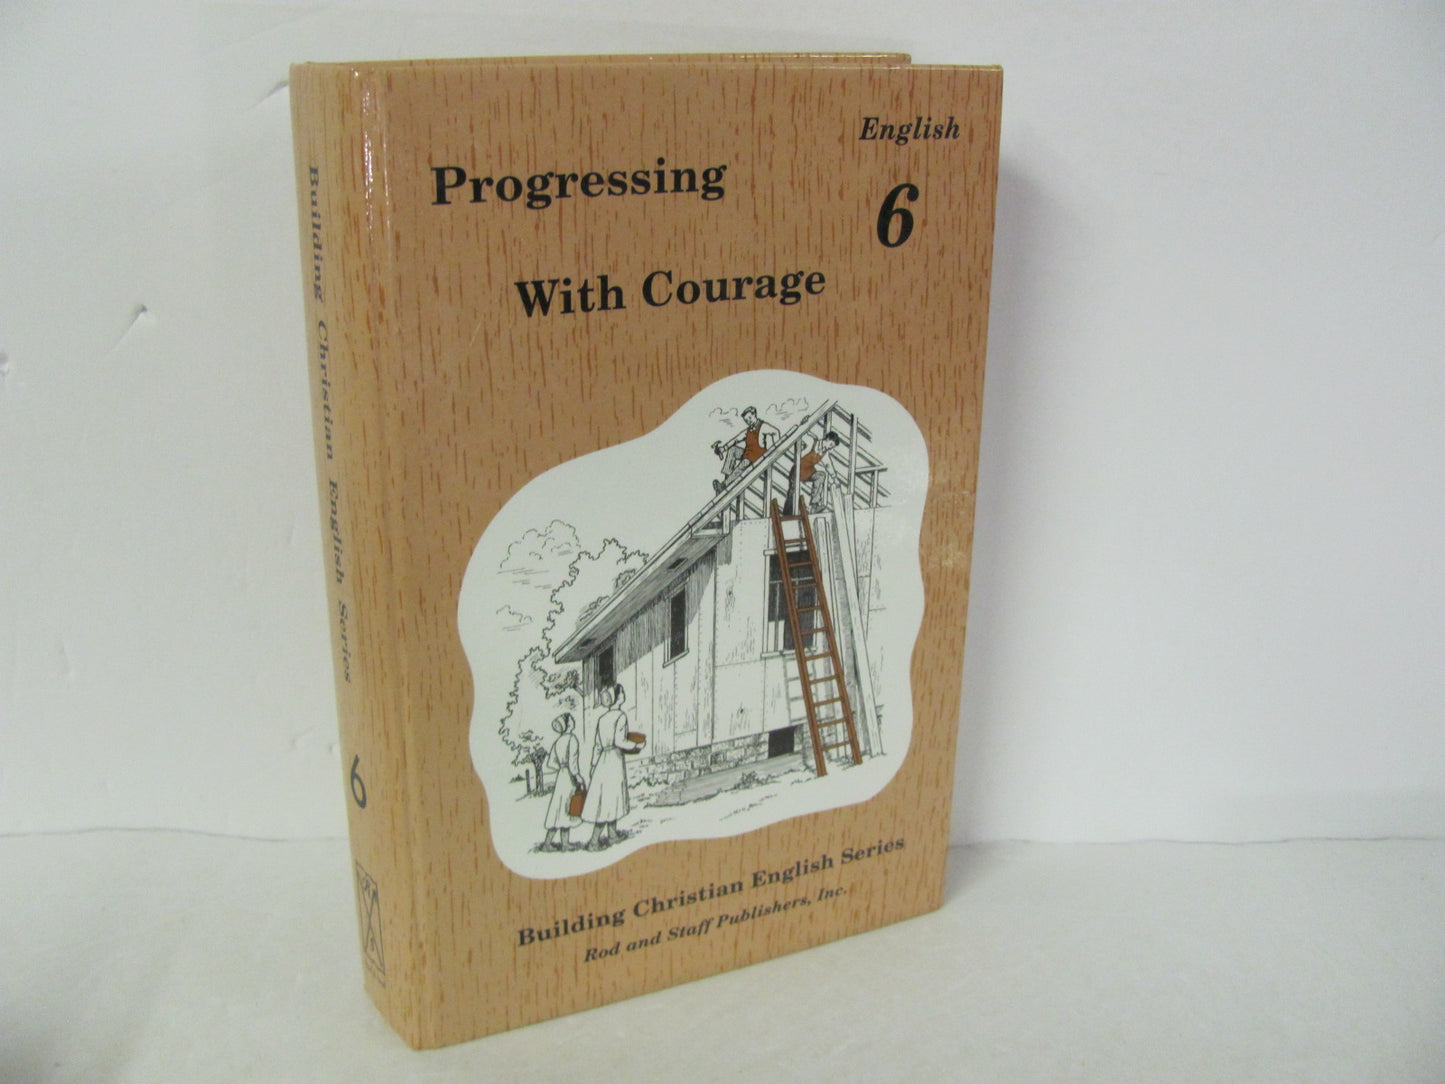 Progressing With Courage Rod & Staff Student Book Pre-Owned Language Textbooks